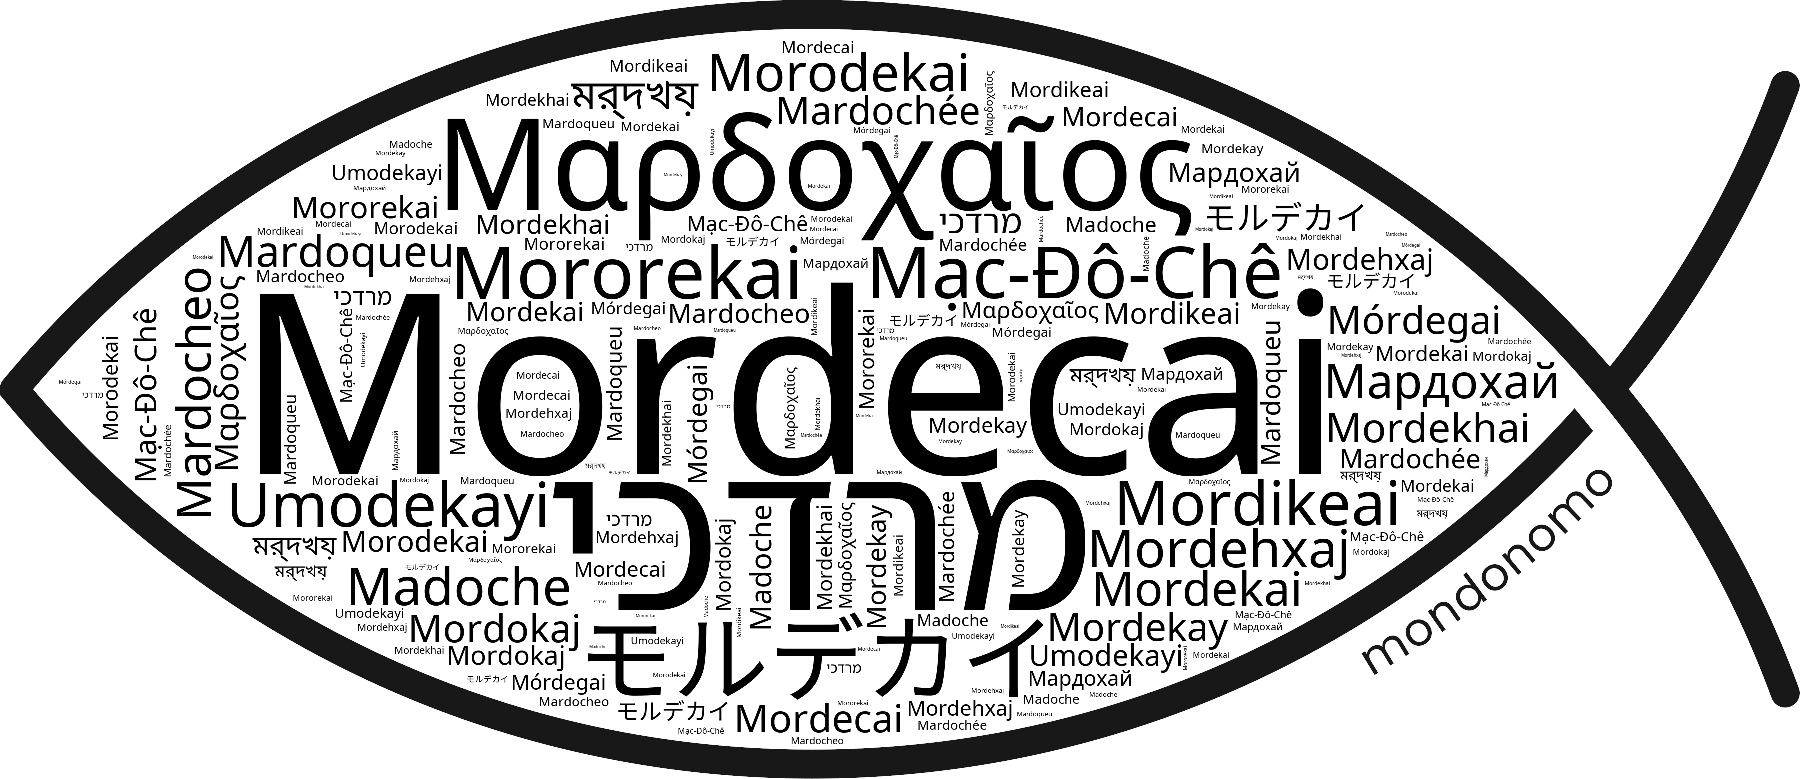 Name Mordecai in the world's Bibles